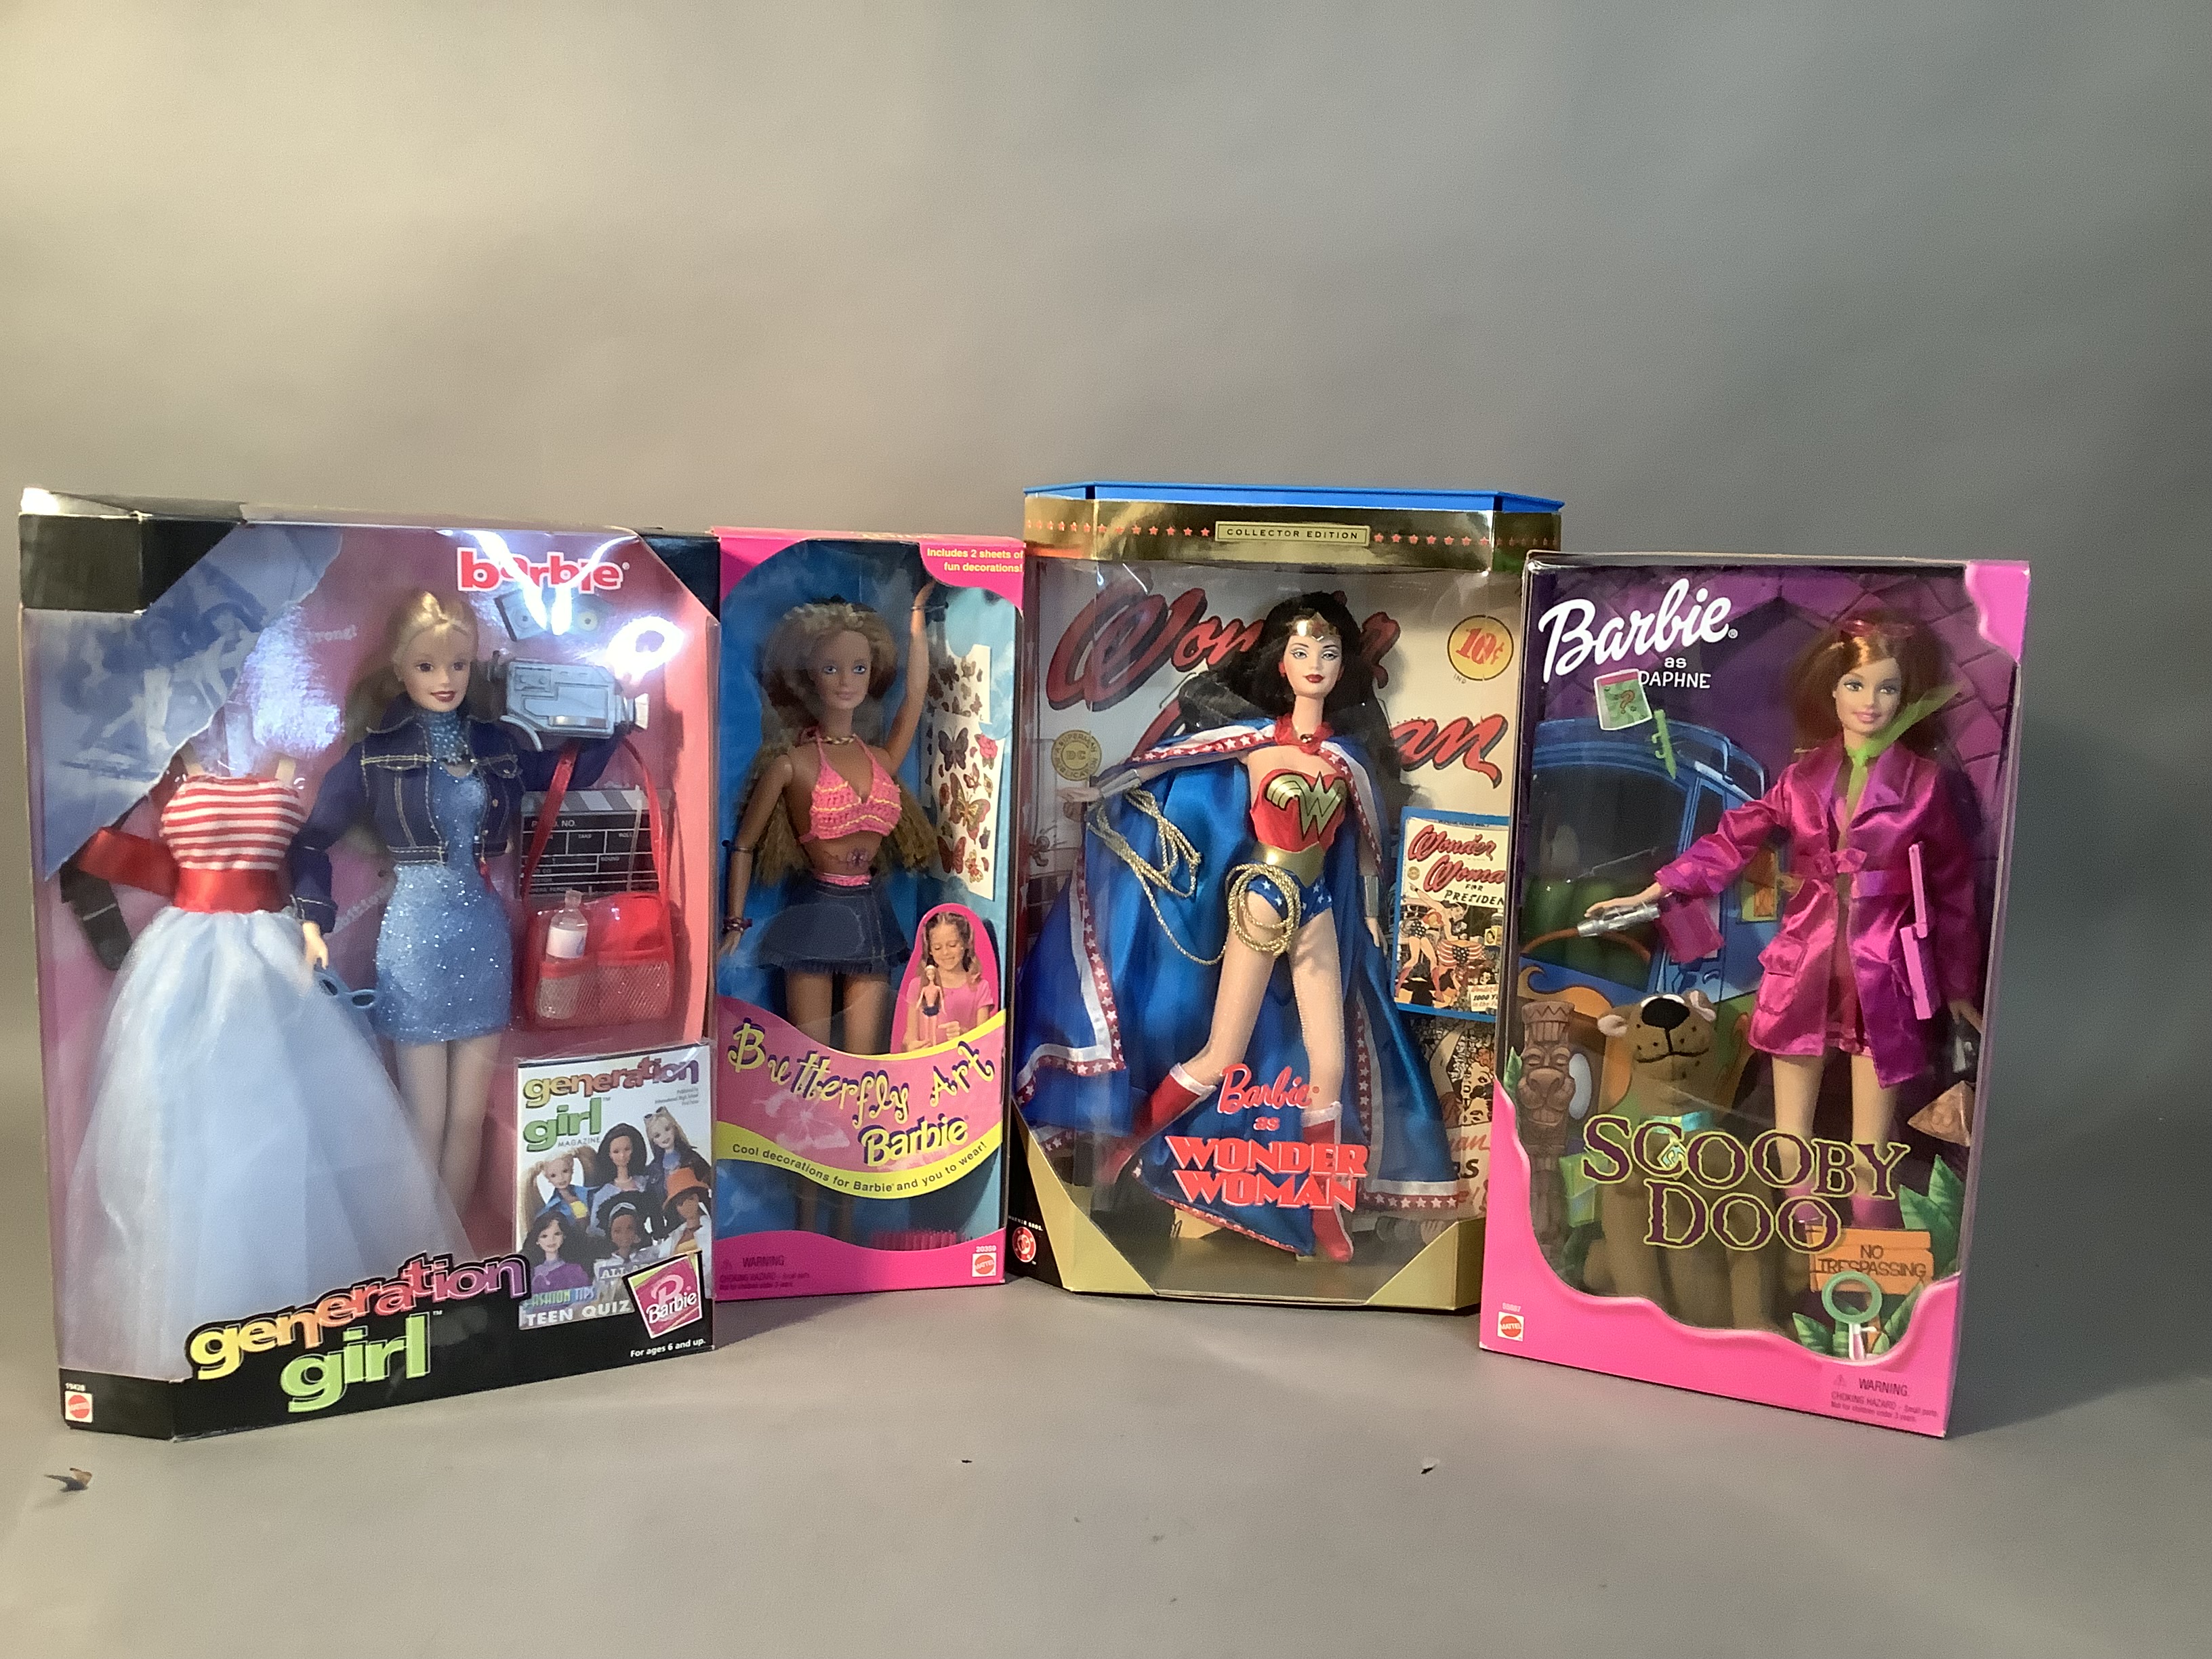 Barbie as Wonder Woman, collector edition, boxed, Barbie Generation girl, Barbie as Daphne Scooby